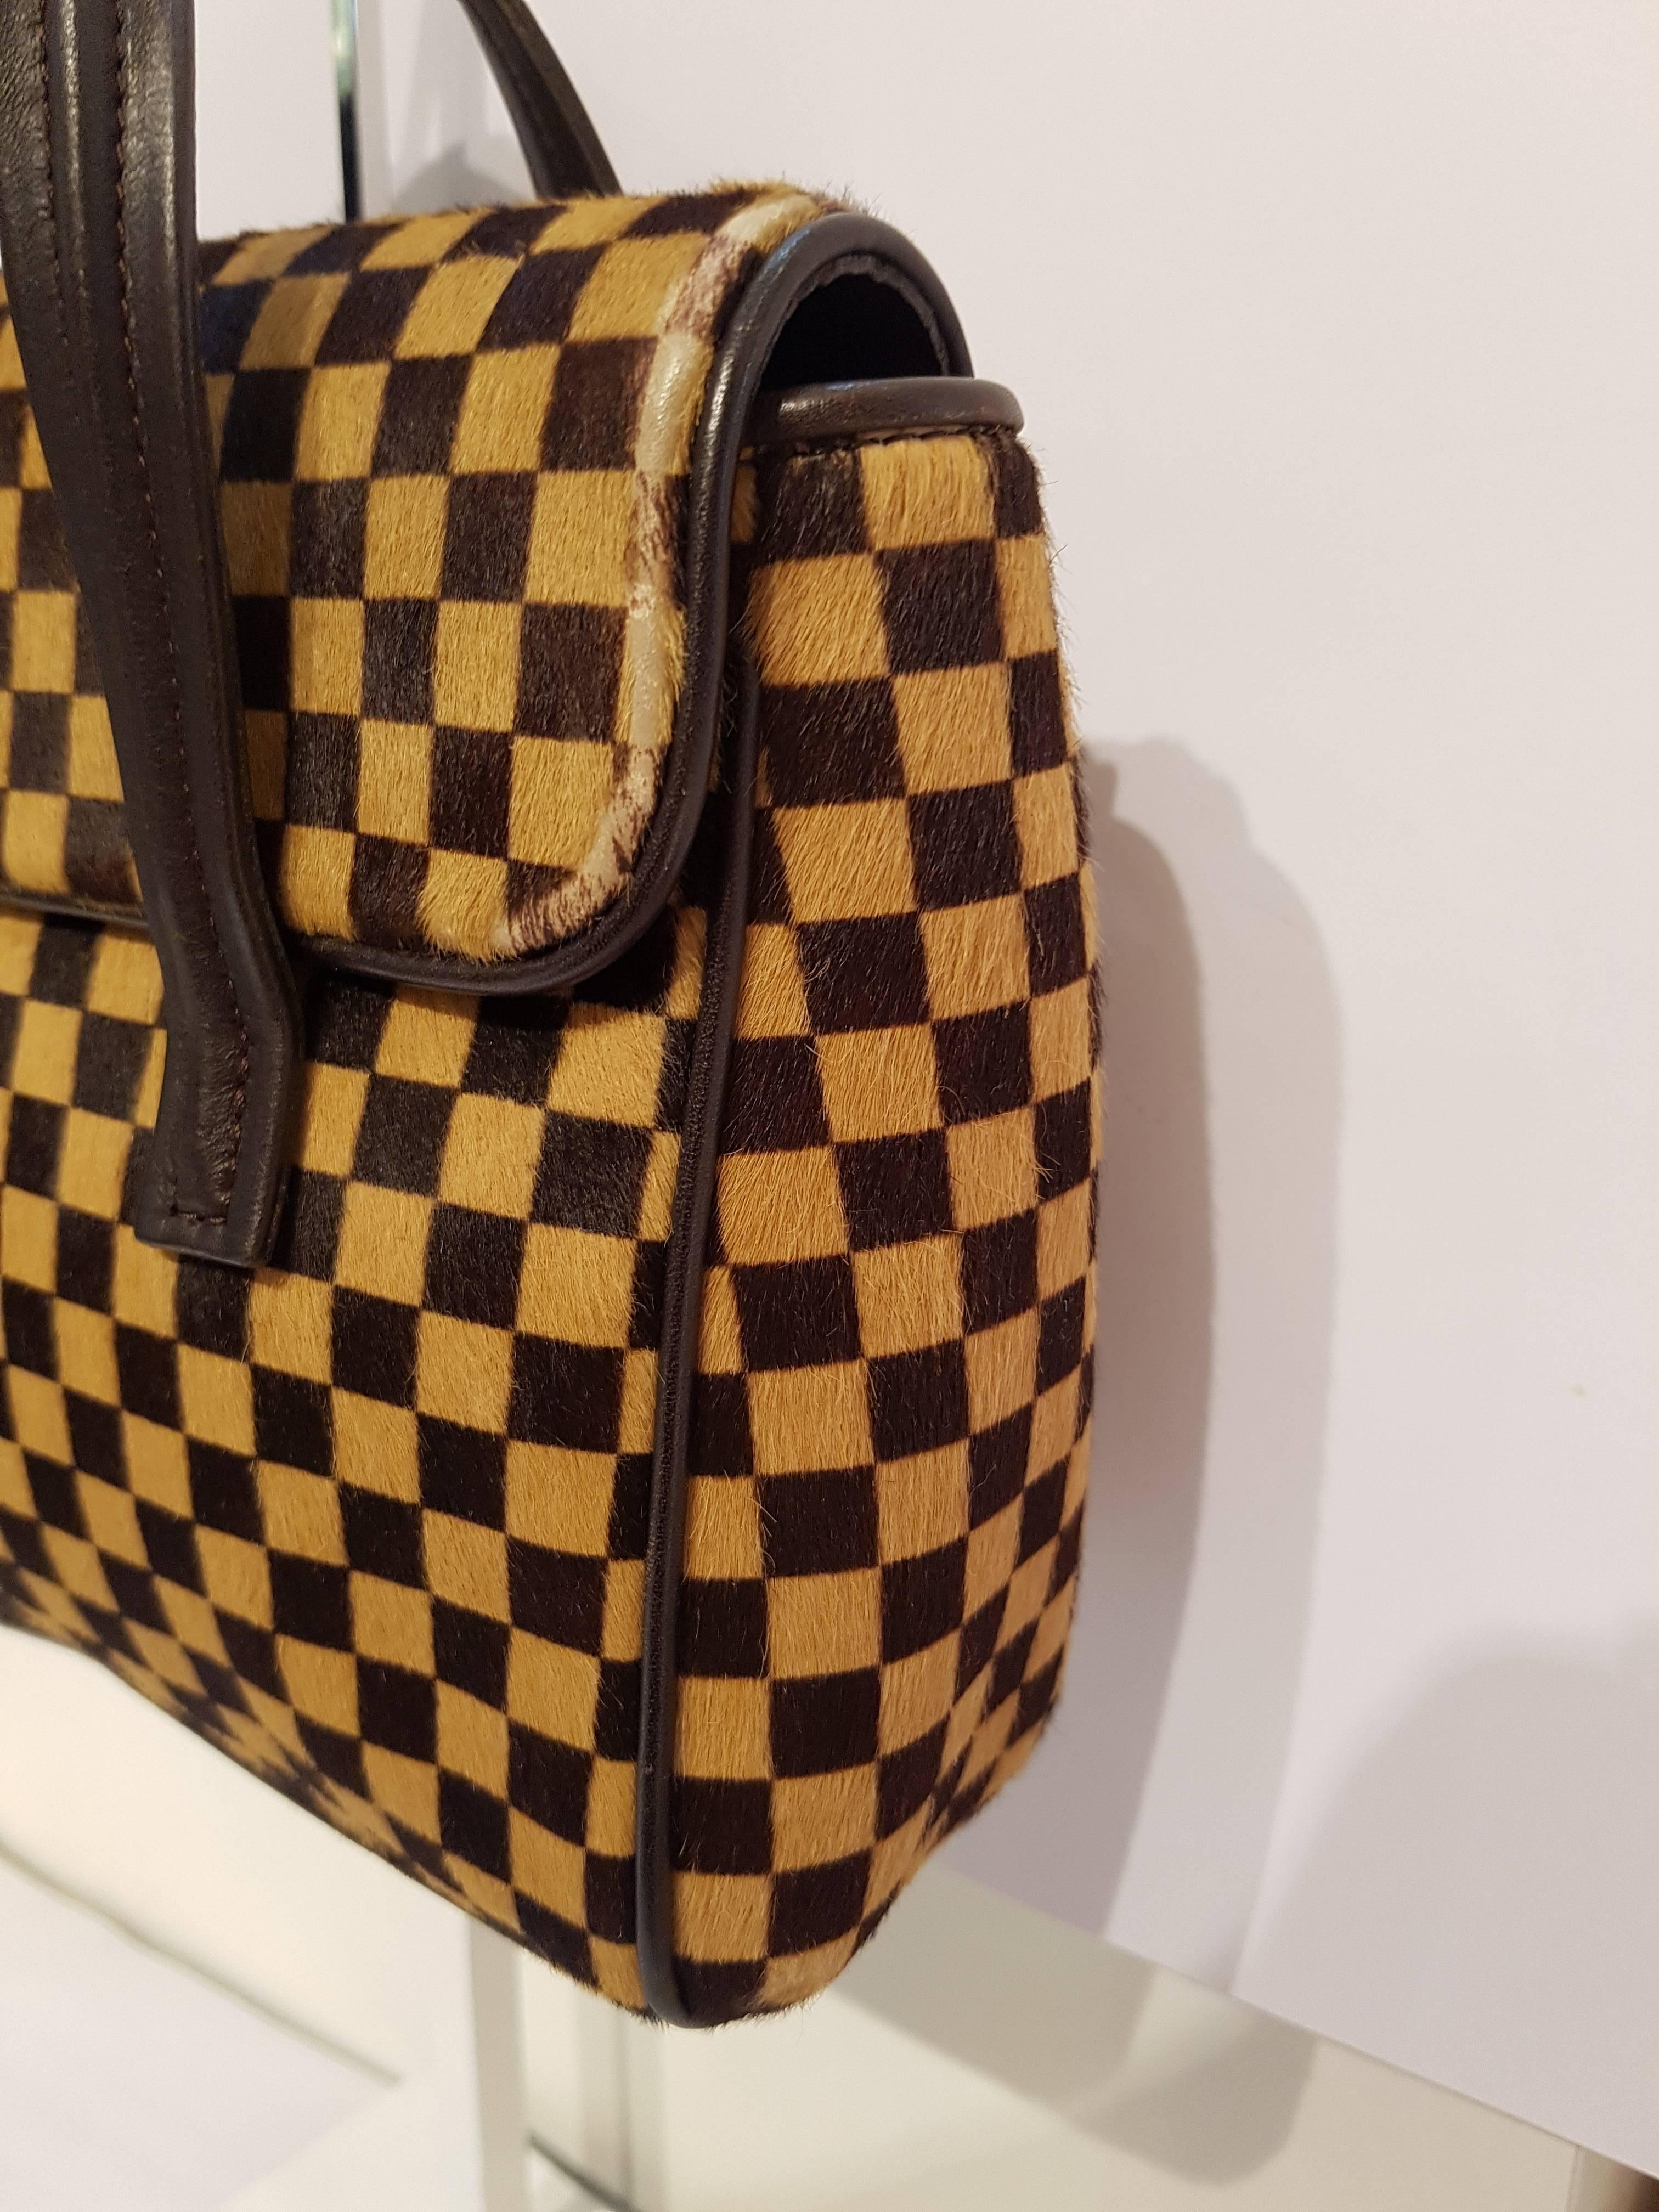 Louis Vuitton Limited Edition Lionne pony Hair bag
LOUIS VUITTON DAMIER SAUVAGE LIONNE PONY HAIR HANDBAG
The item is in good condition with some damages.